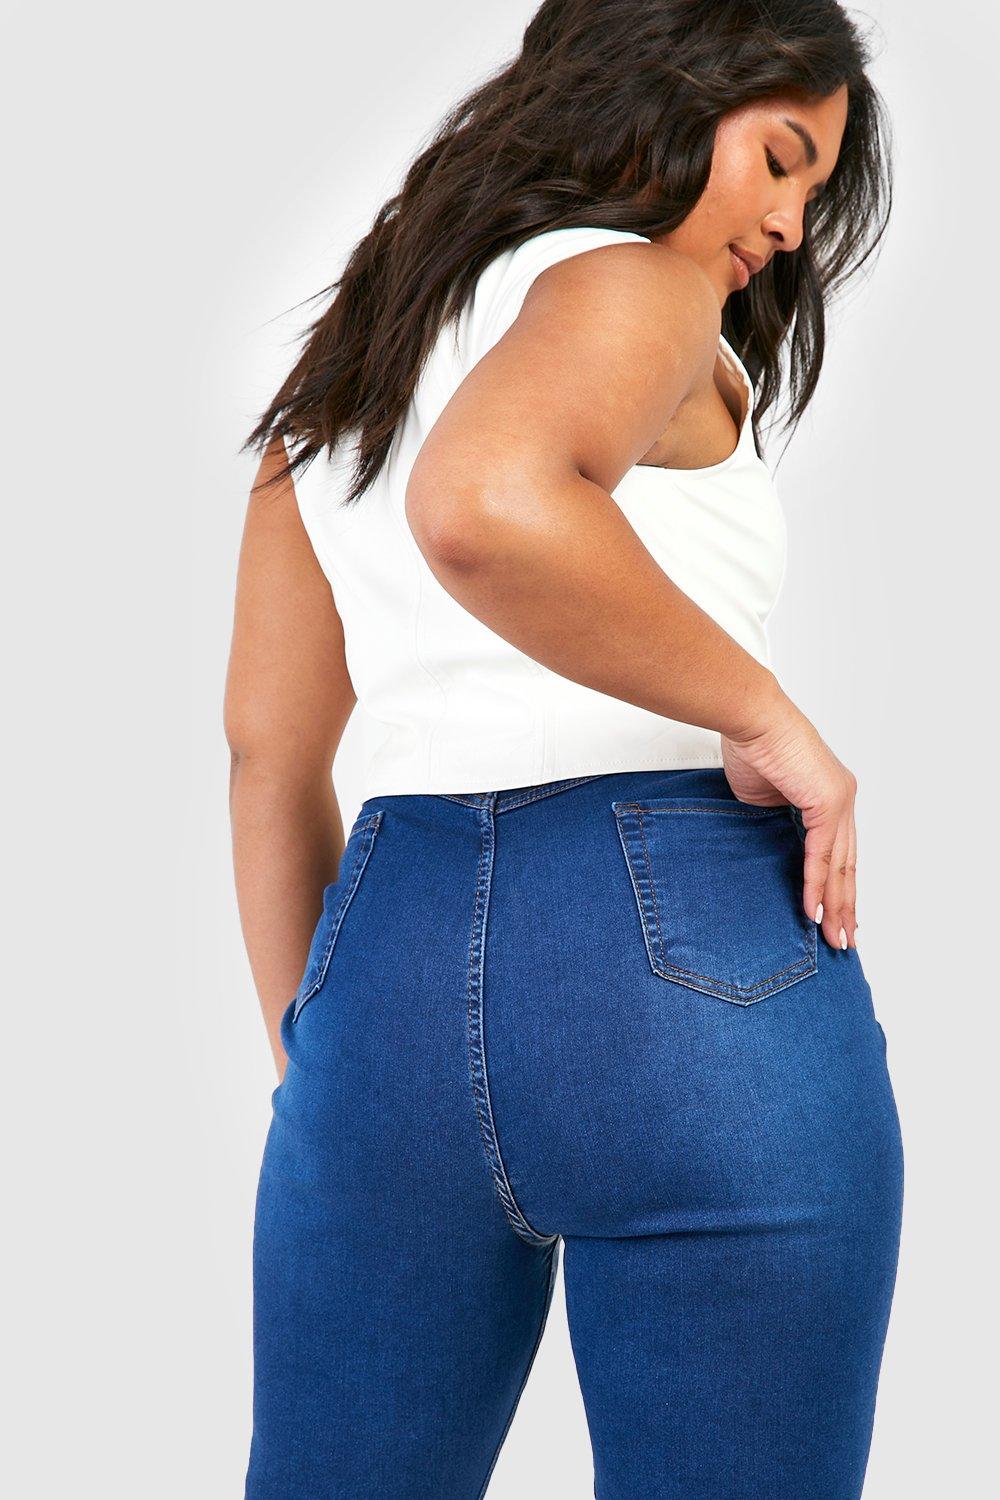 Plus size buttocks exposed high waist